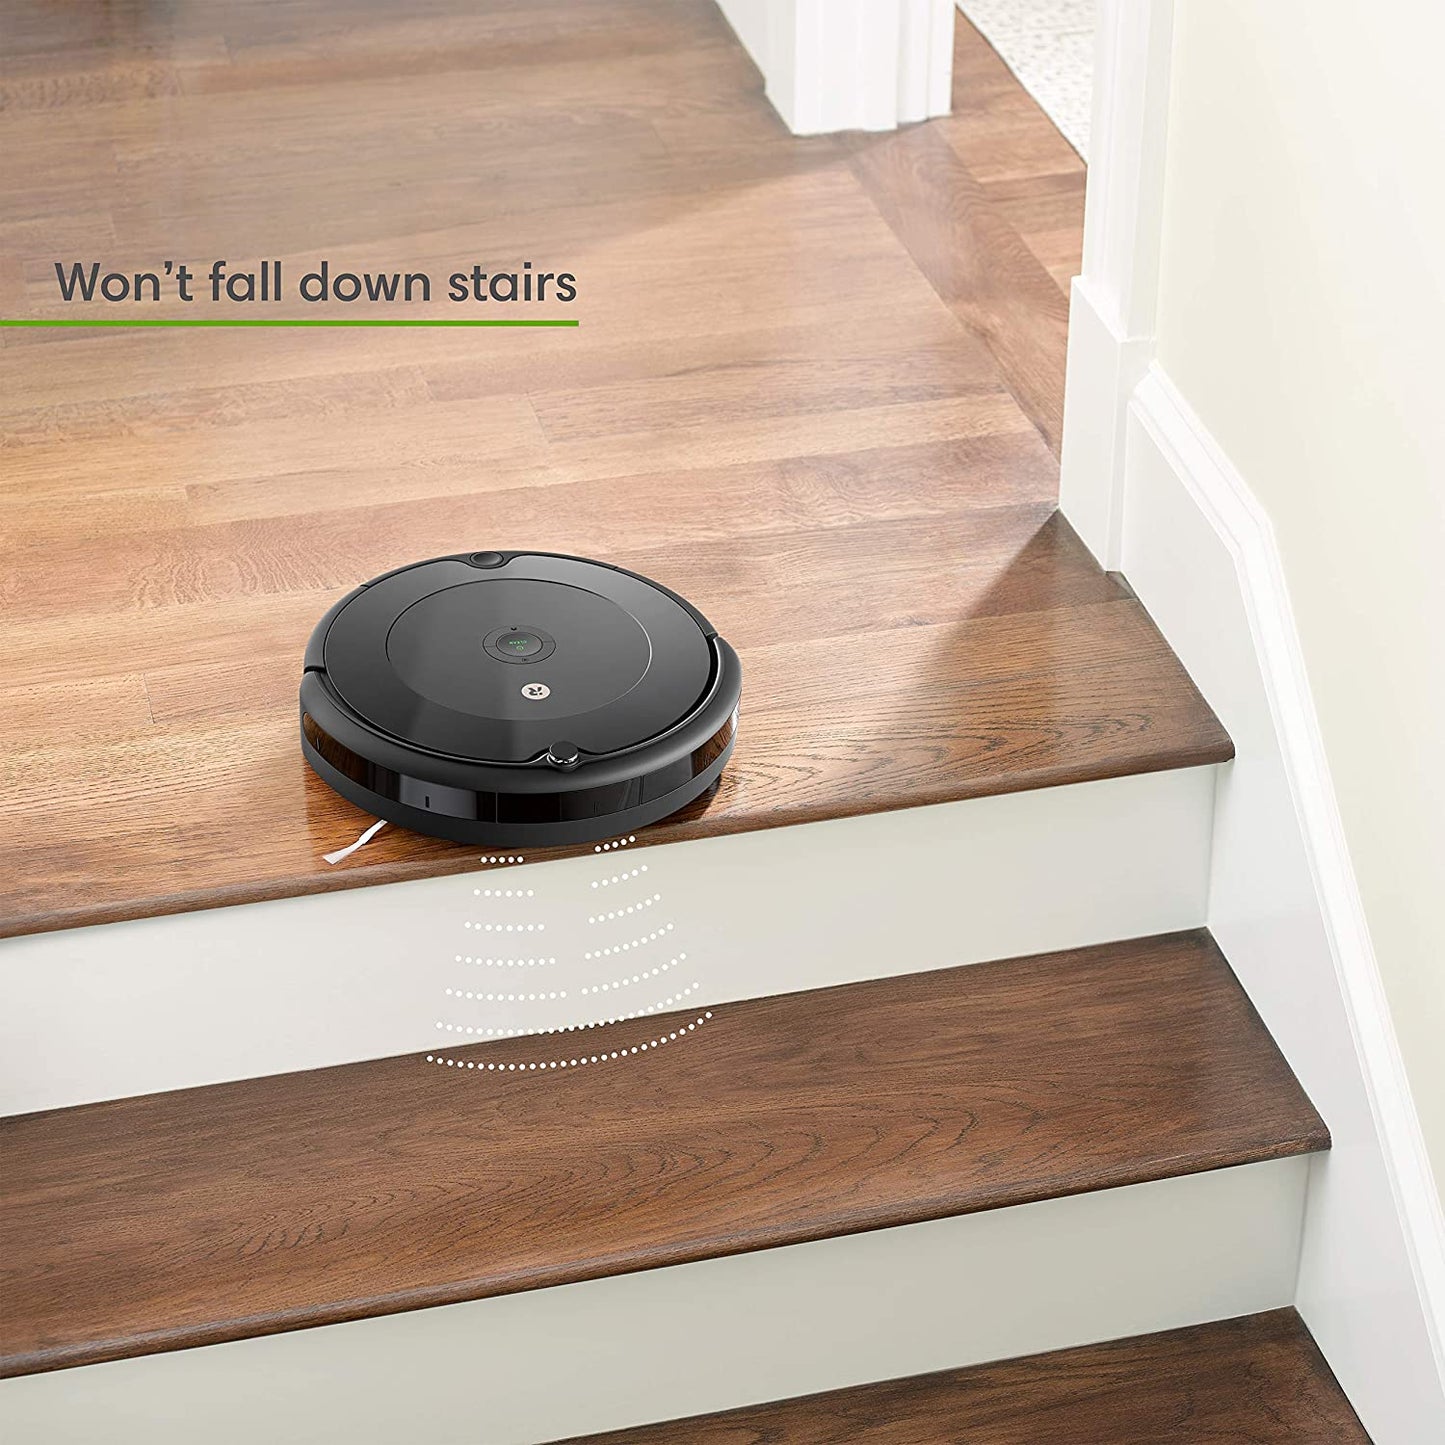 iRobot Roomba 692 Robot Vacuum-Wi-Fi Connectivity, Personalized Cleaning Recommendations, Works with Alexa, Good for Pet Hair, Carpets, Hard Floors, Self-Charging, Charcoal Grey